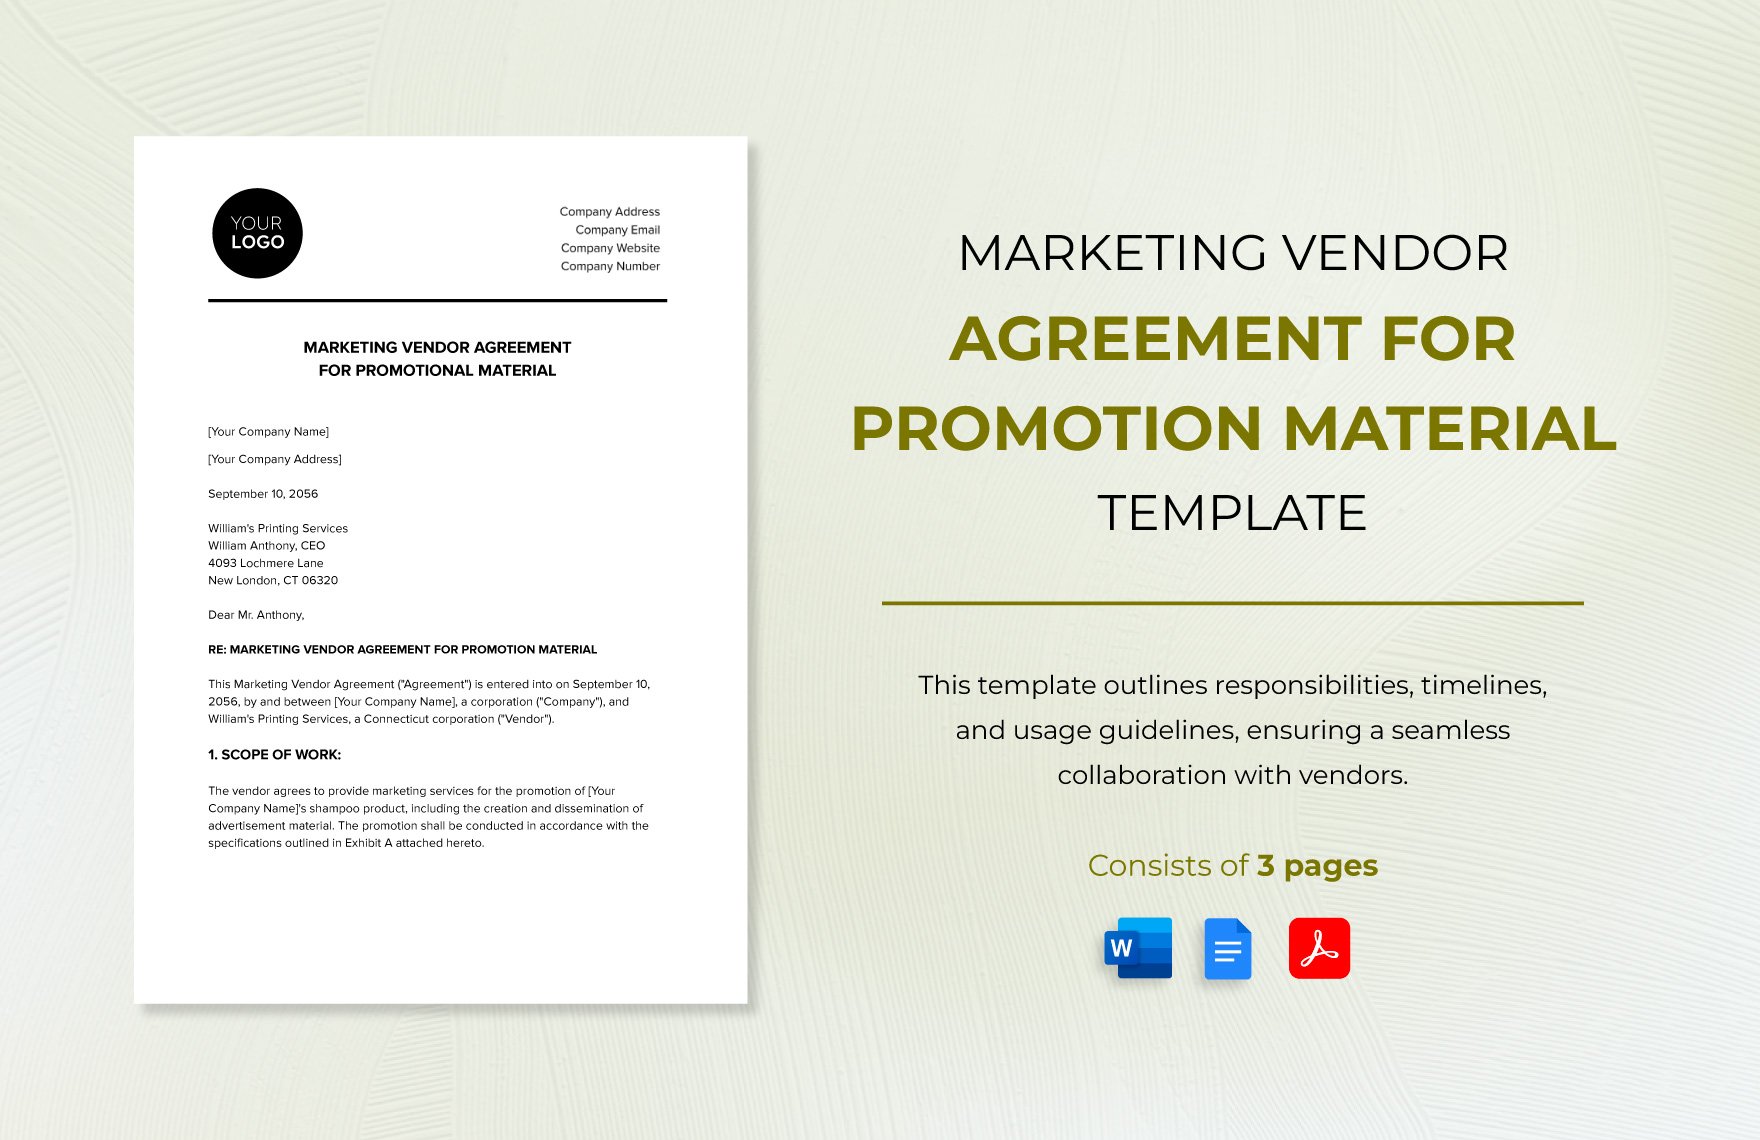 Marketing Vendor Agreement for Promotion Material Template